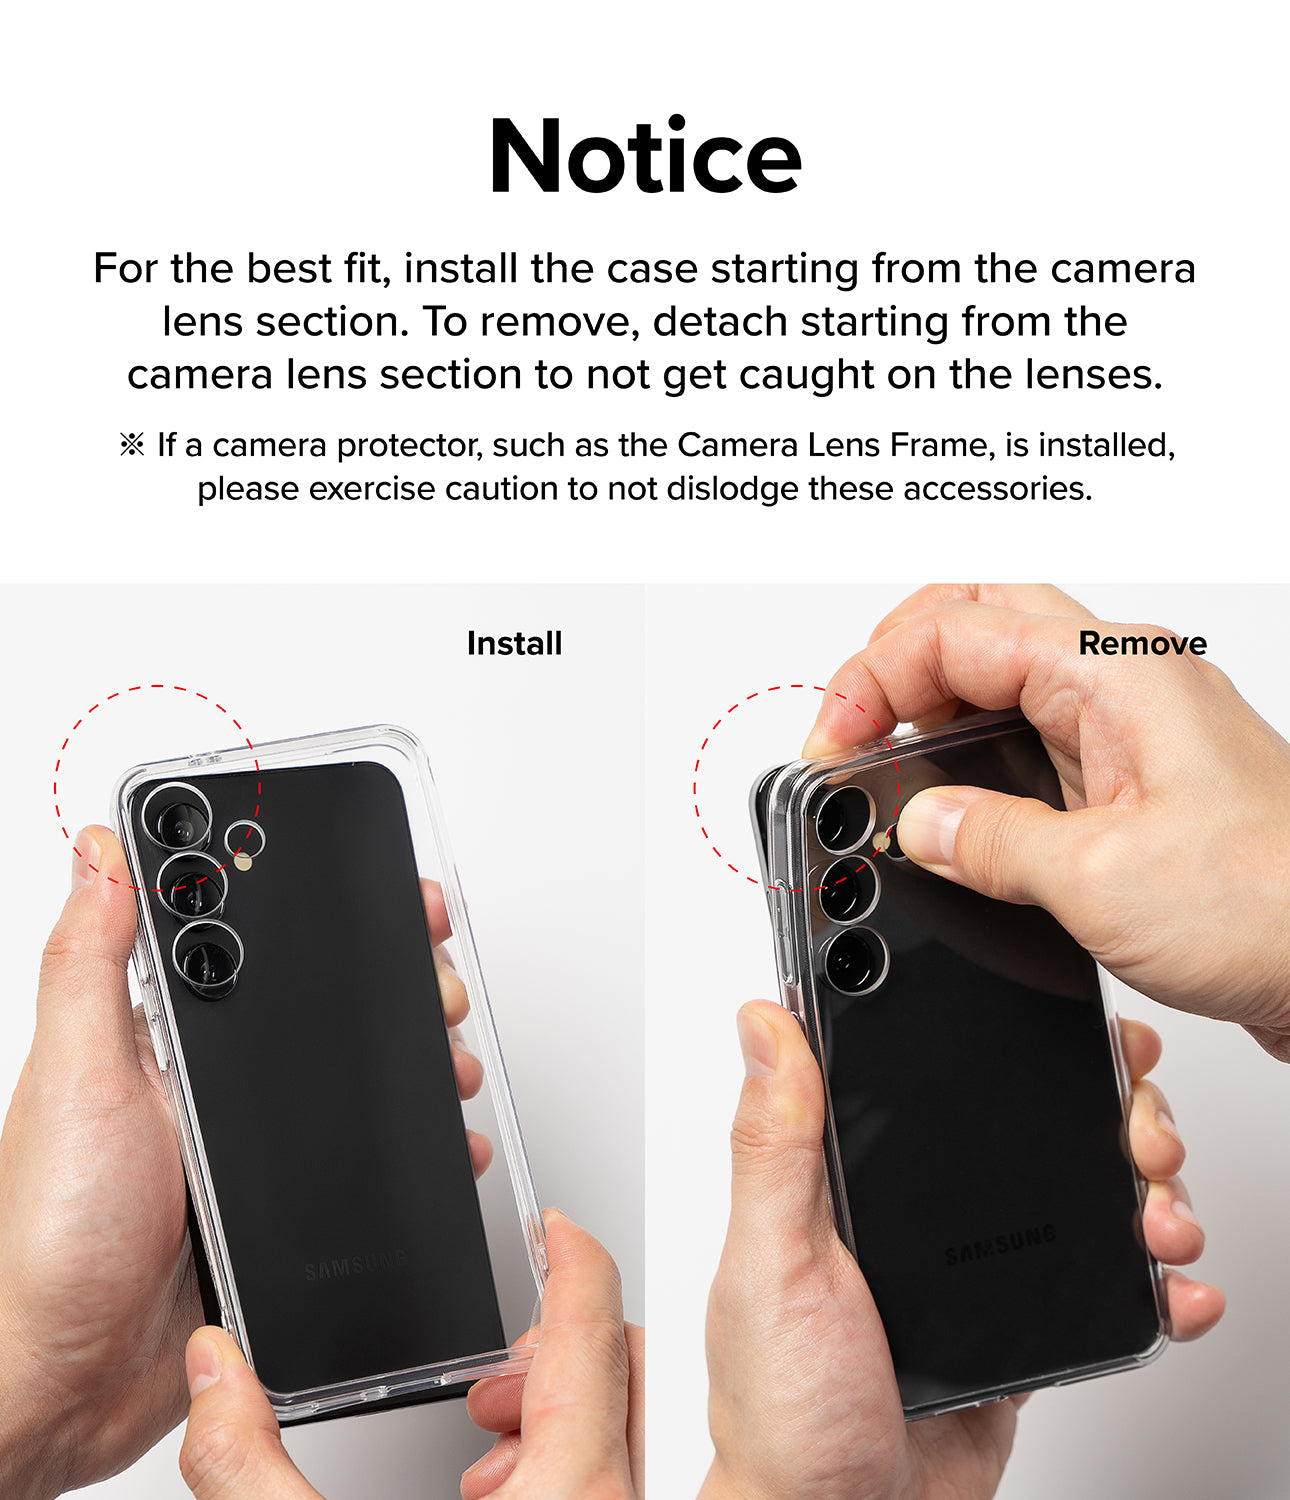 Galaxy S24 Ultra Case | Onyx - Gray - Notice. For the best fit, install the case starting from the camera lens section. To remove, detach starting from the camera lens section to not get caught on the lenses.